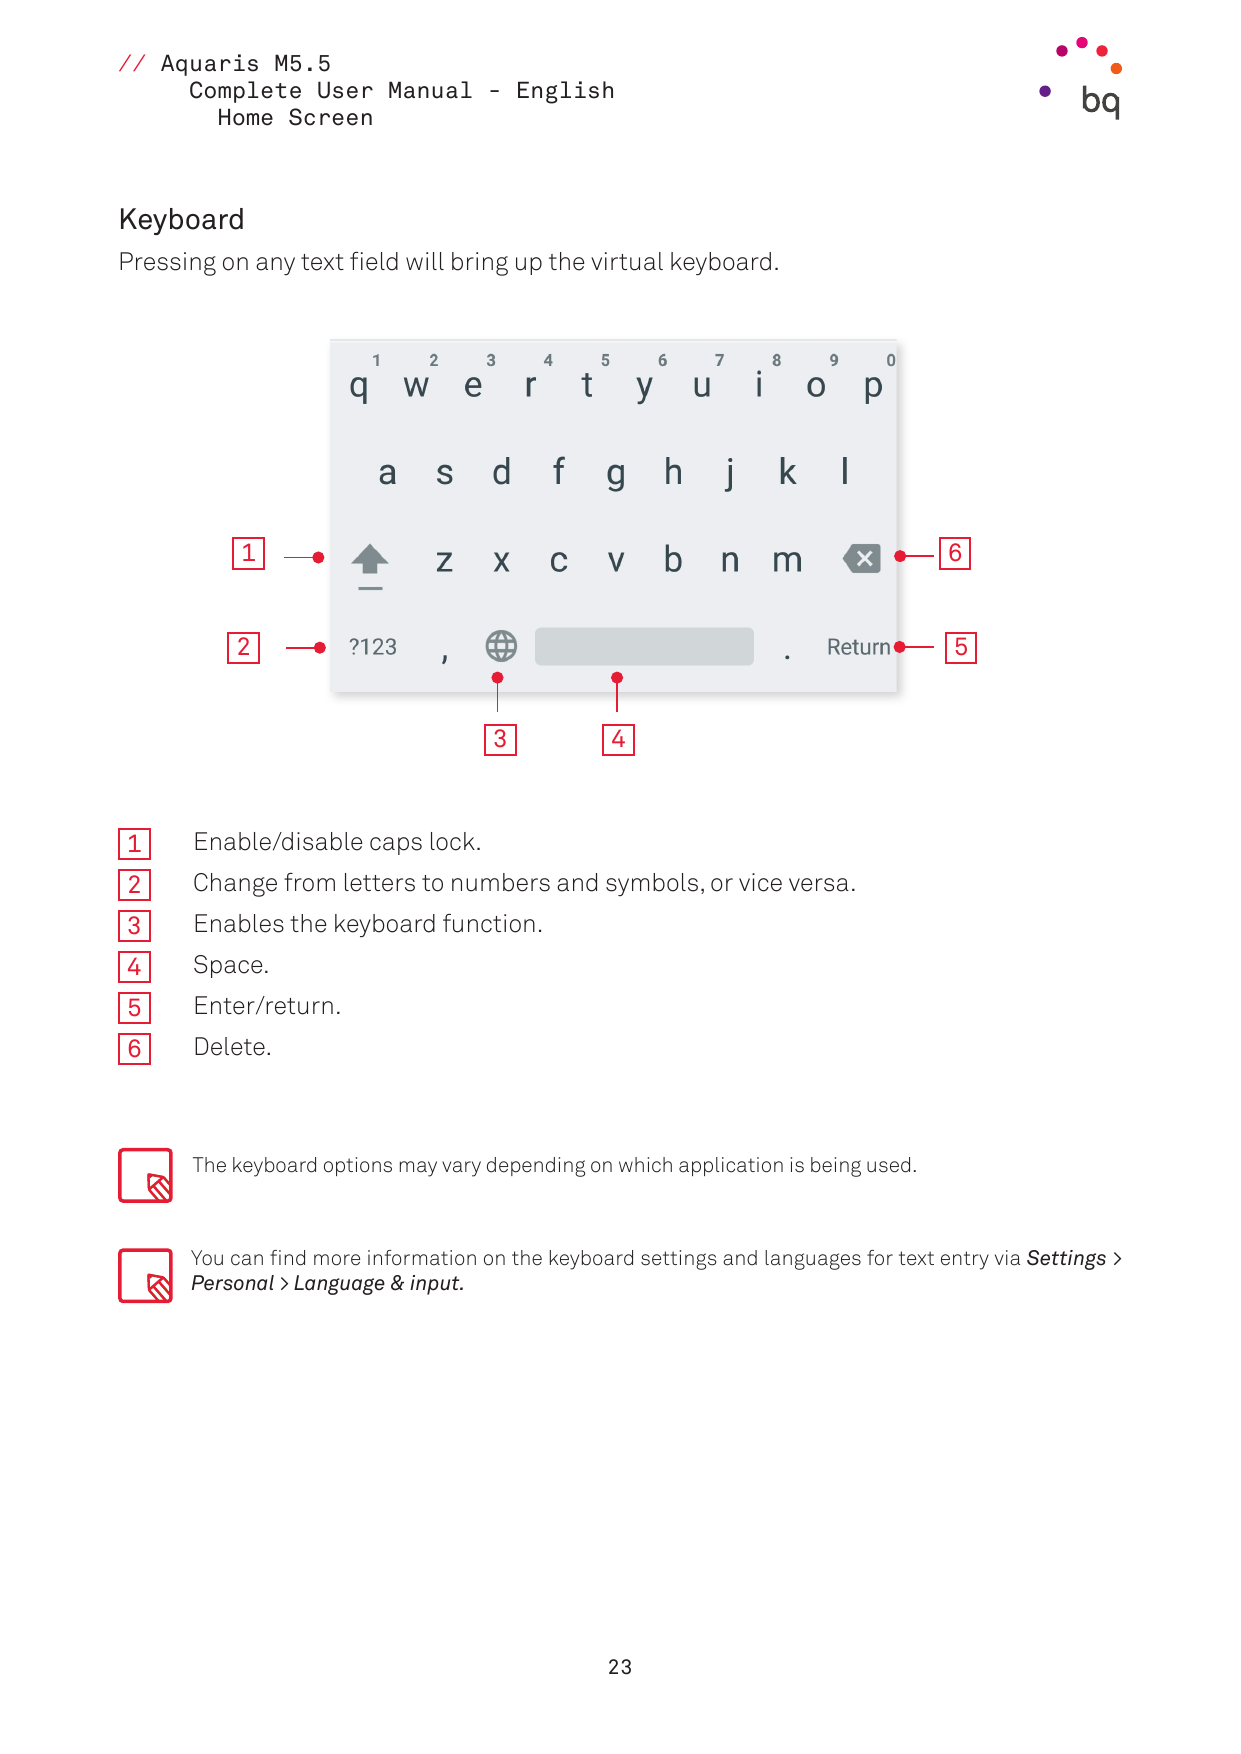 // Aquaris M5.5Complete User Manual - EnglishHome ScreenKeyboardPressing on any text field will bring up the virtual keyboard.16